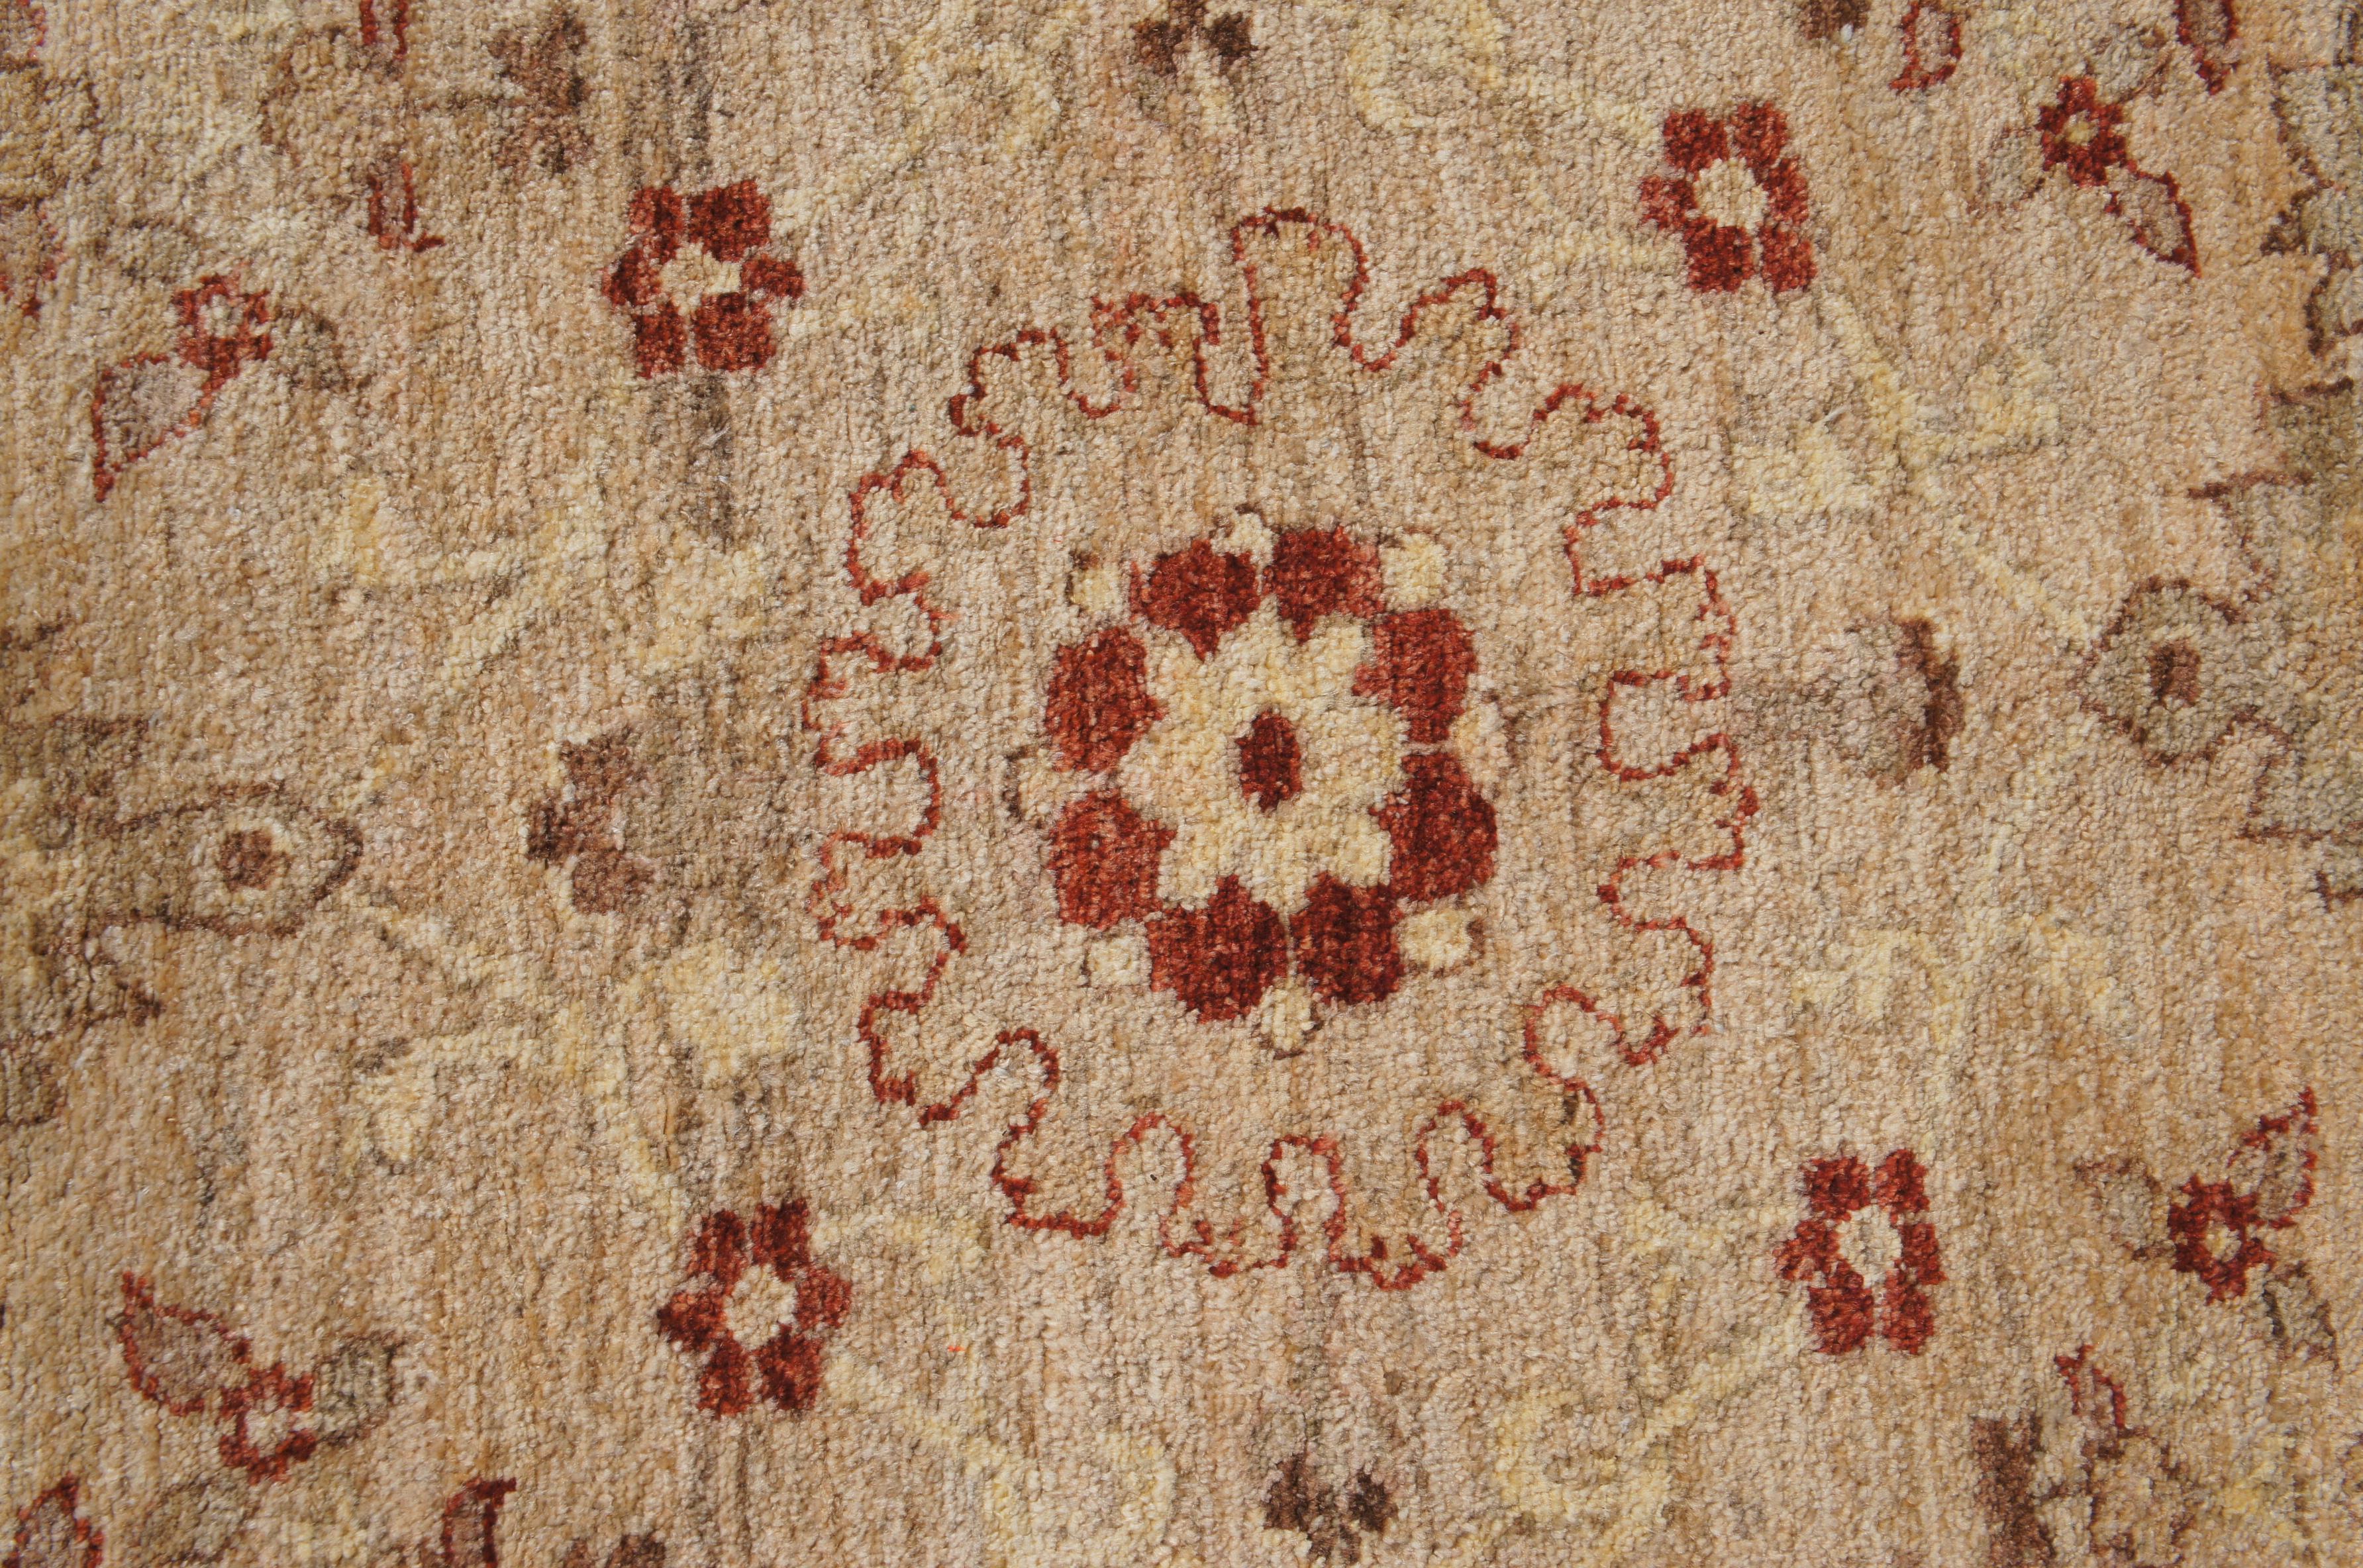 Hand Woven Pakistani Peshawar Red & Beige Floral Carpet Wool Area Rug 8' x 10' For Sale 2